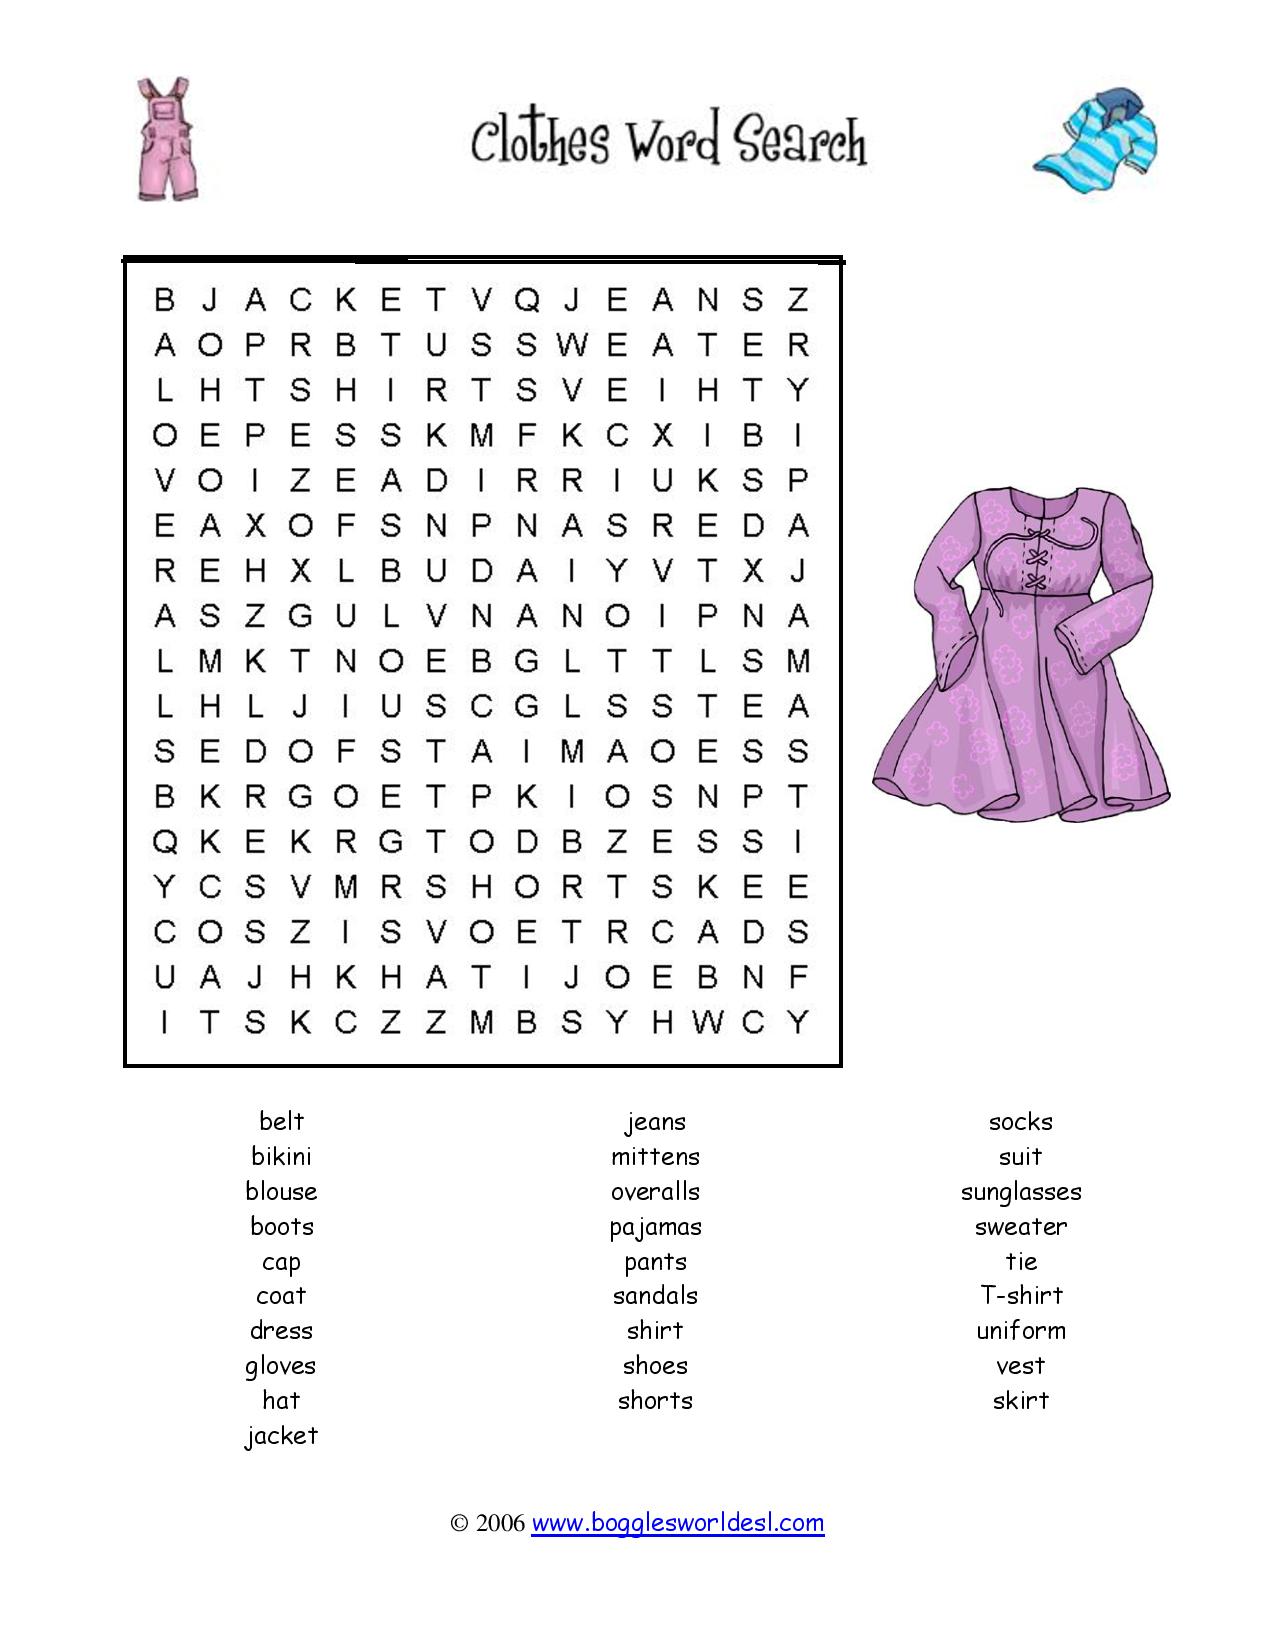 clothing_wordsearch